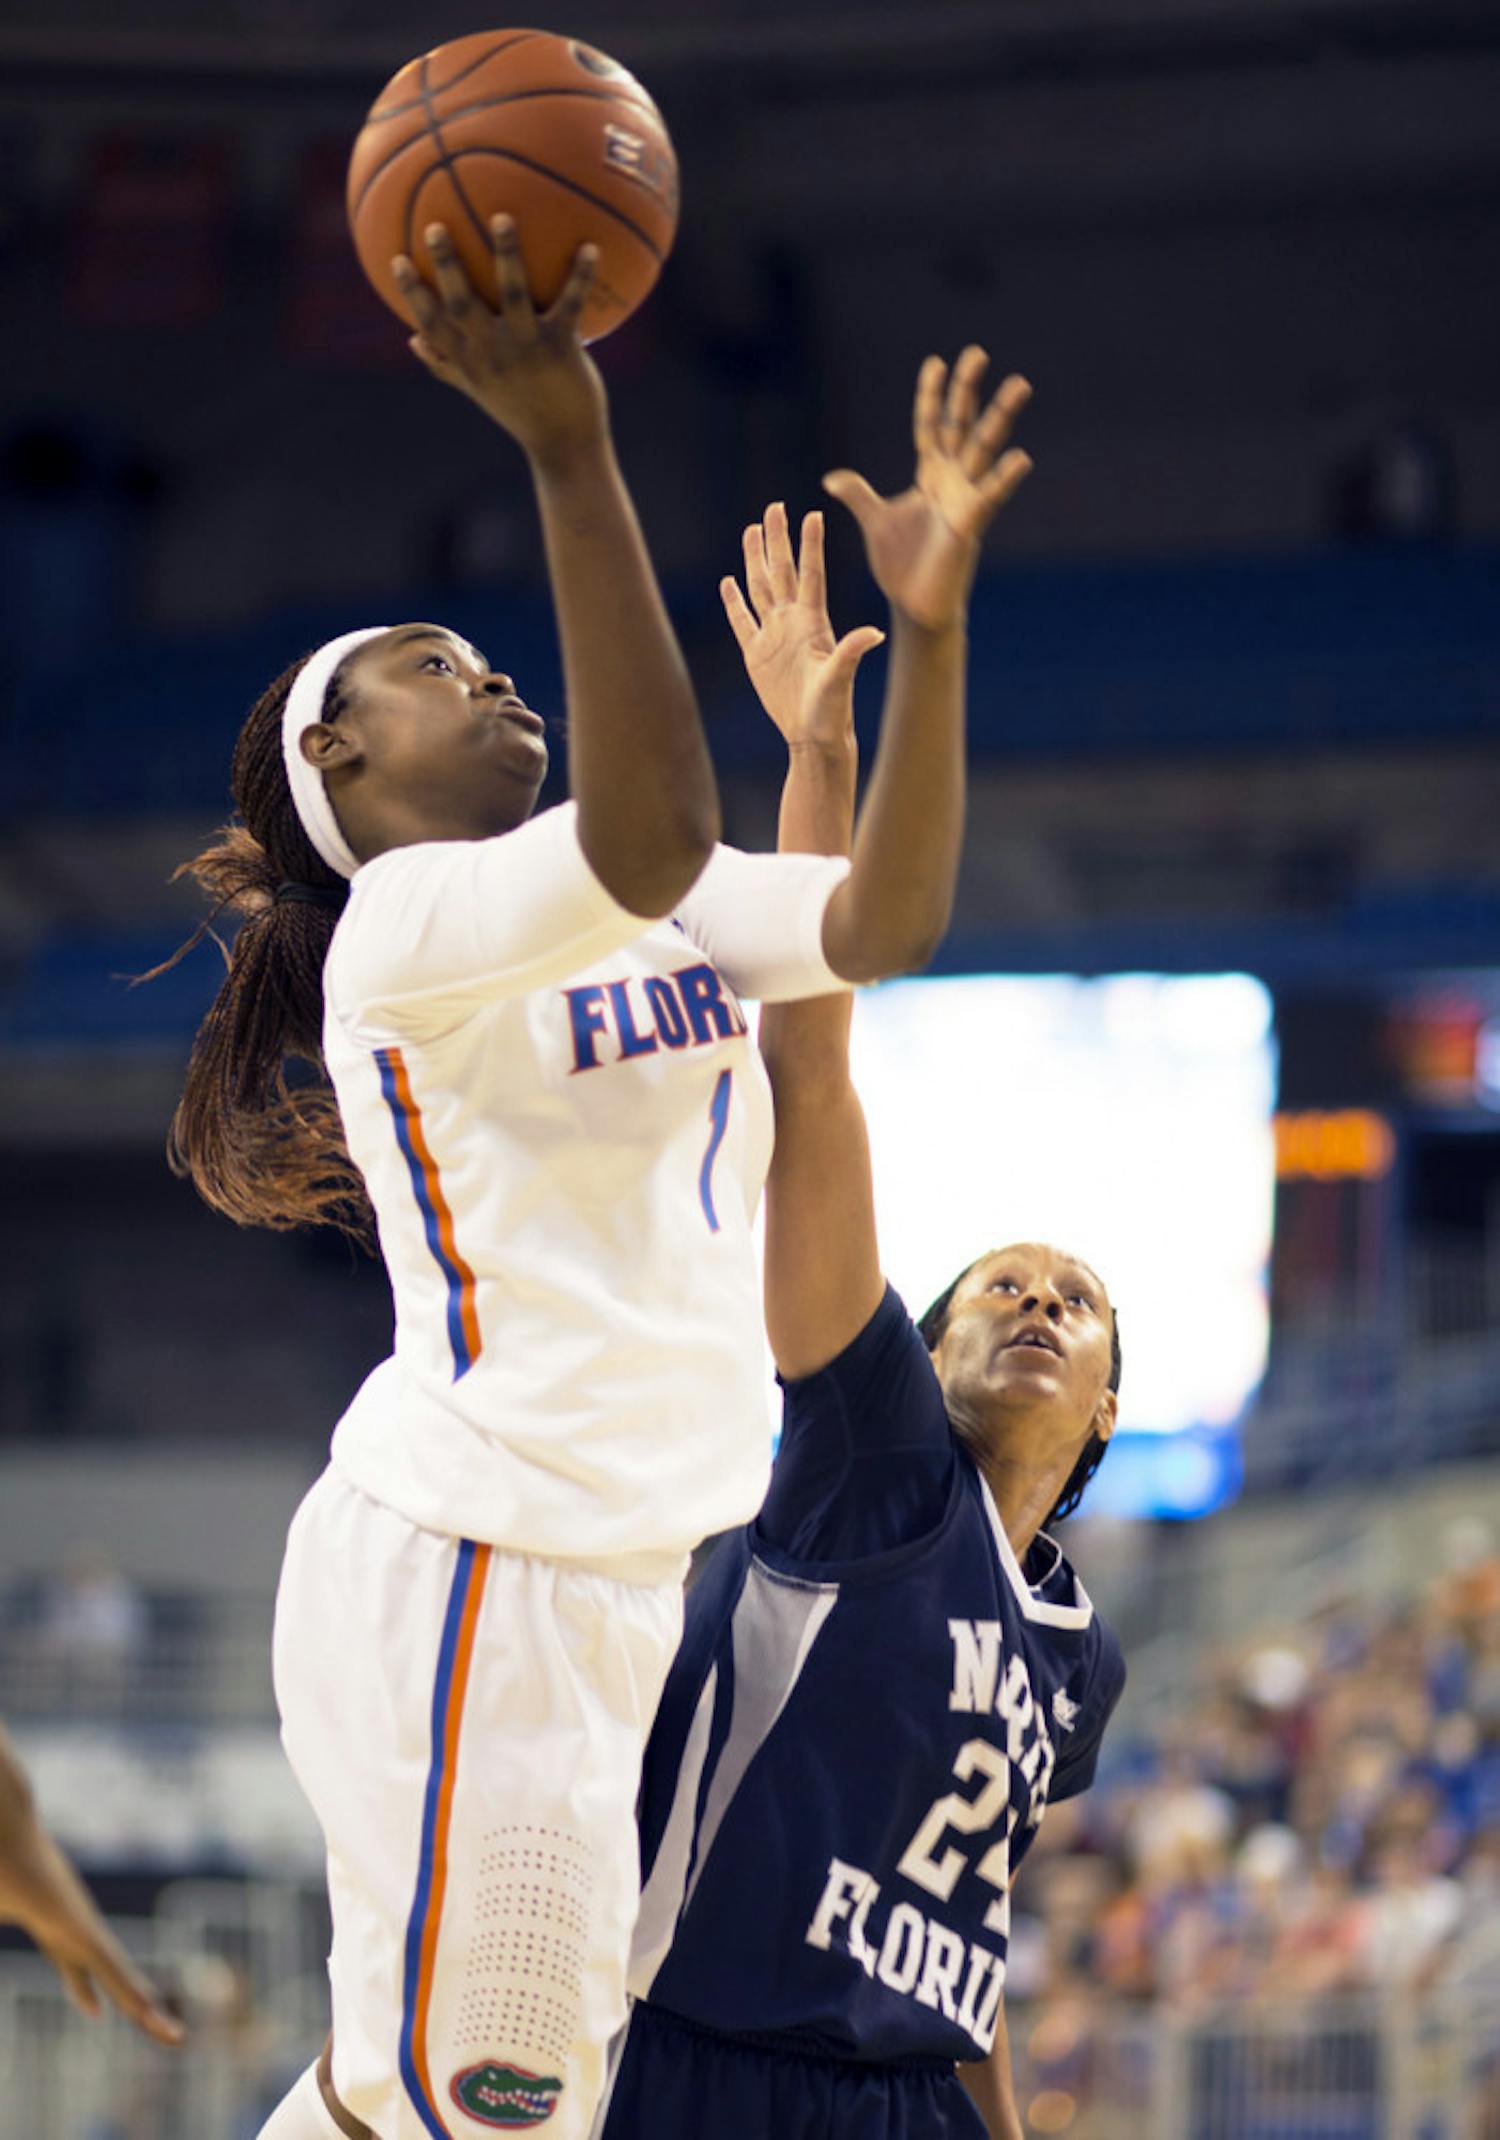 Ronni Williams attempts a shot during Florida’s 88-77 win against North Florida on Nov. 10 in the O’Connell Center. Williams scored 19 points and grabbed 10 rebounds against No. 6 Kentucky on Sunday.